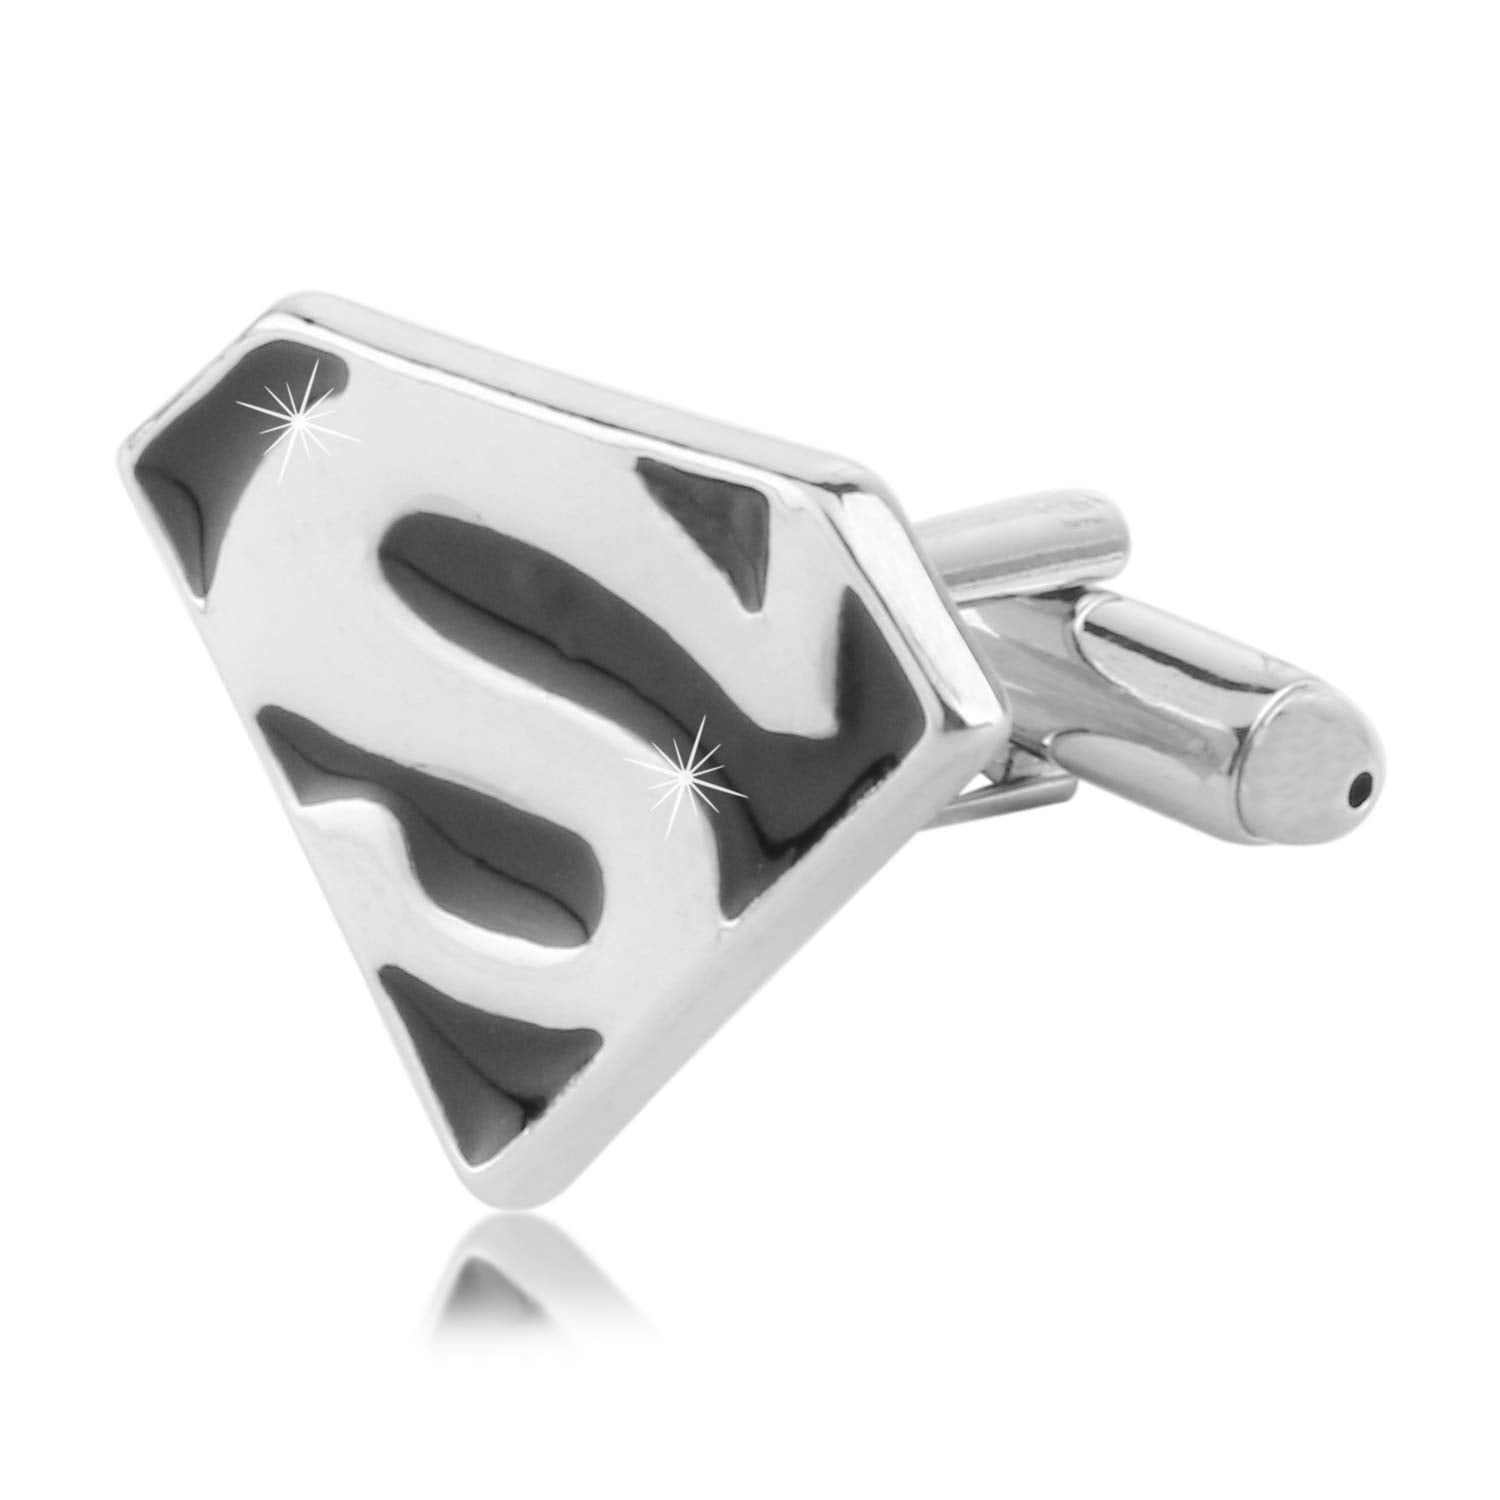 Yellow Chimes Marvels Hero Superman Black Casual/Formal Cufflinks for Men and Boys